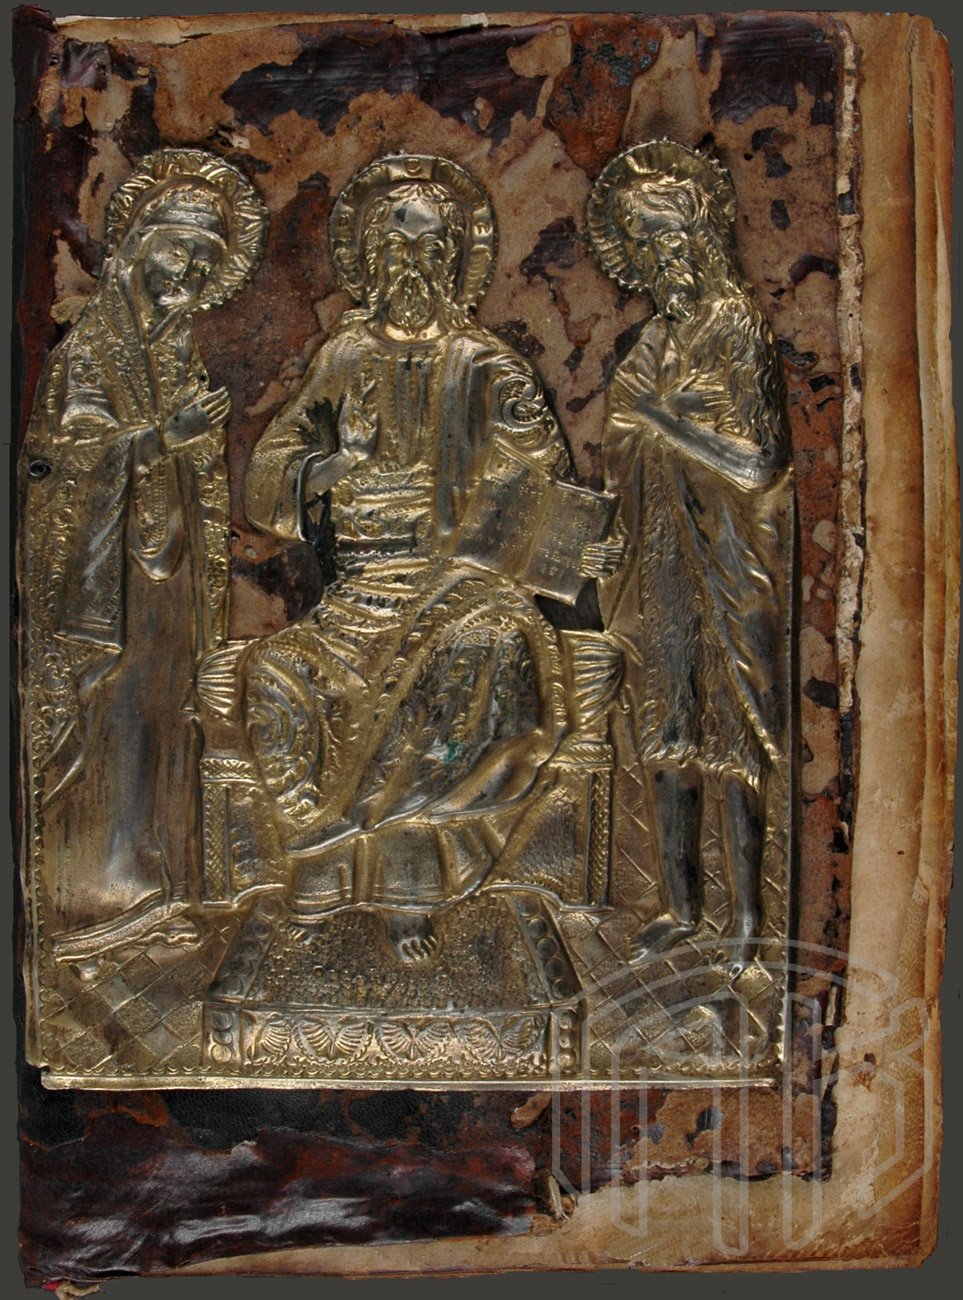 A relief silver later plaque has been attached on the front cover, which presents Jesus Christ holding the Gospel on his left hand and blessing with the right hand, flanked by the Virgin Mary and Saint John the Baptist.